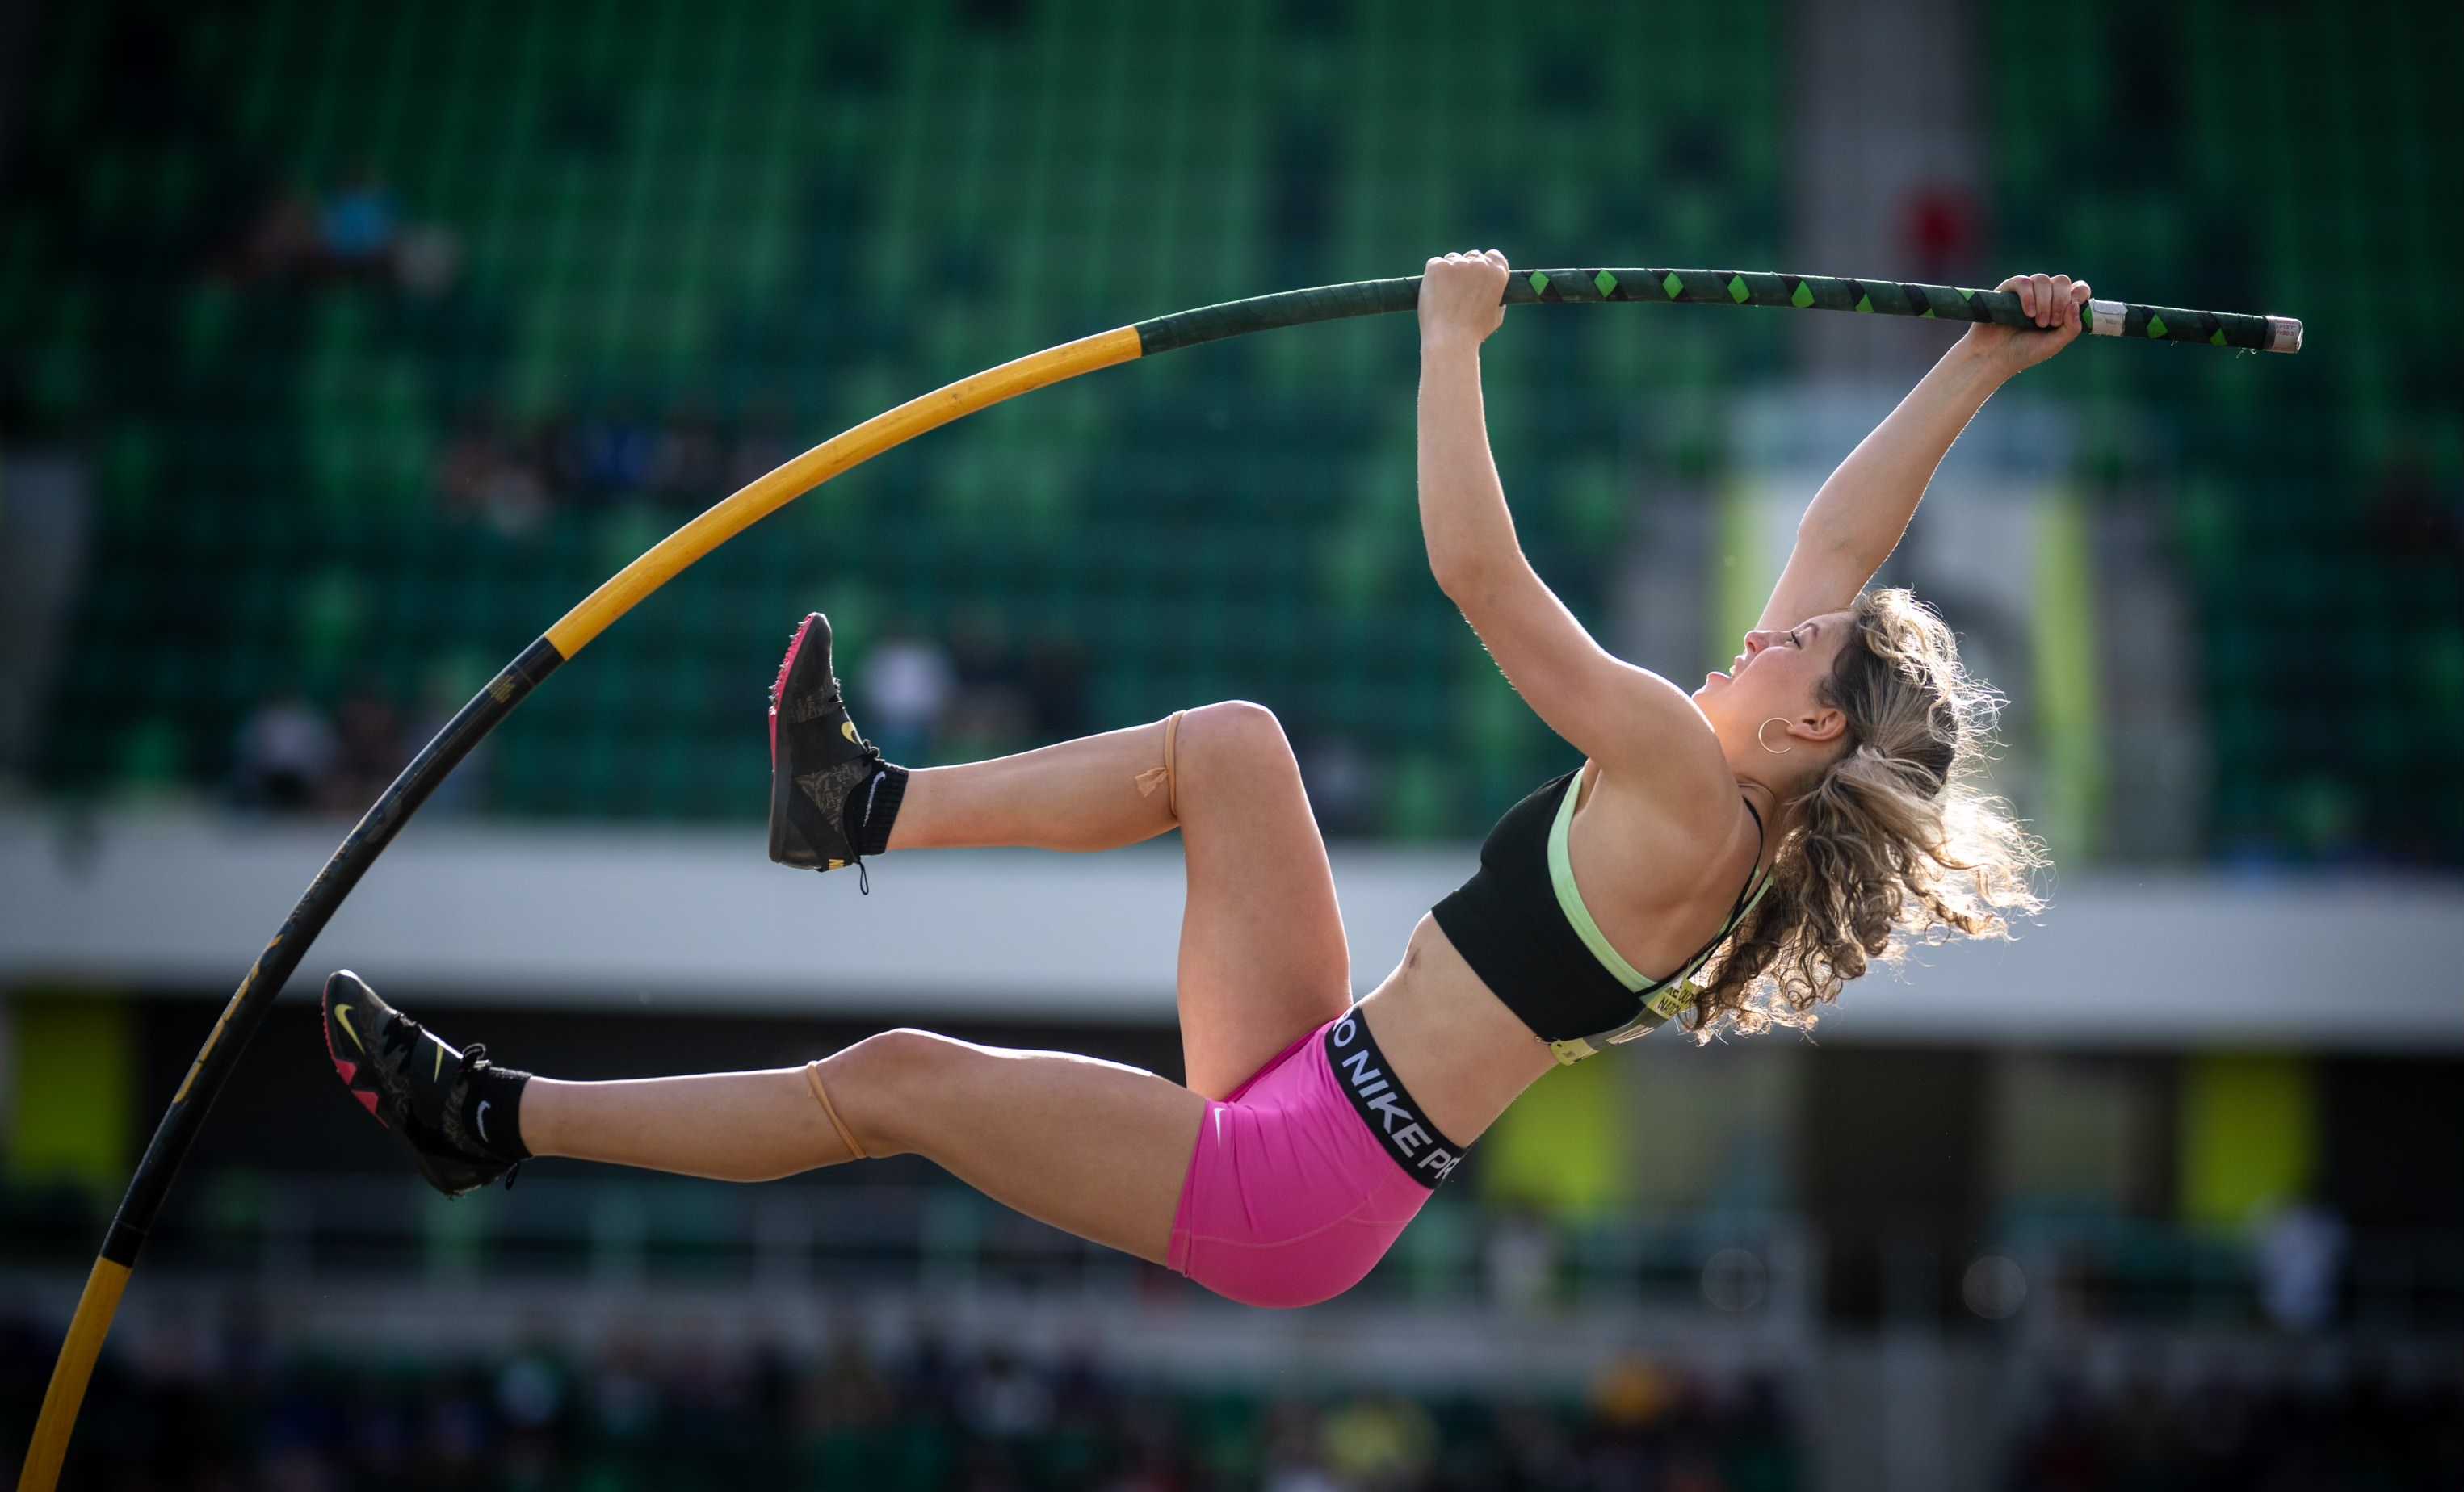 Addison Kleinke cleared 14 feet, 1/2 inch at Nike Outdoor Nationals on June 15 at Hayward Field. (Photo by Brynn Kleinke)